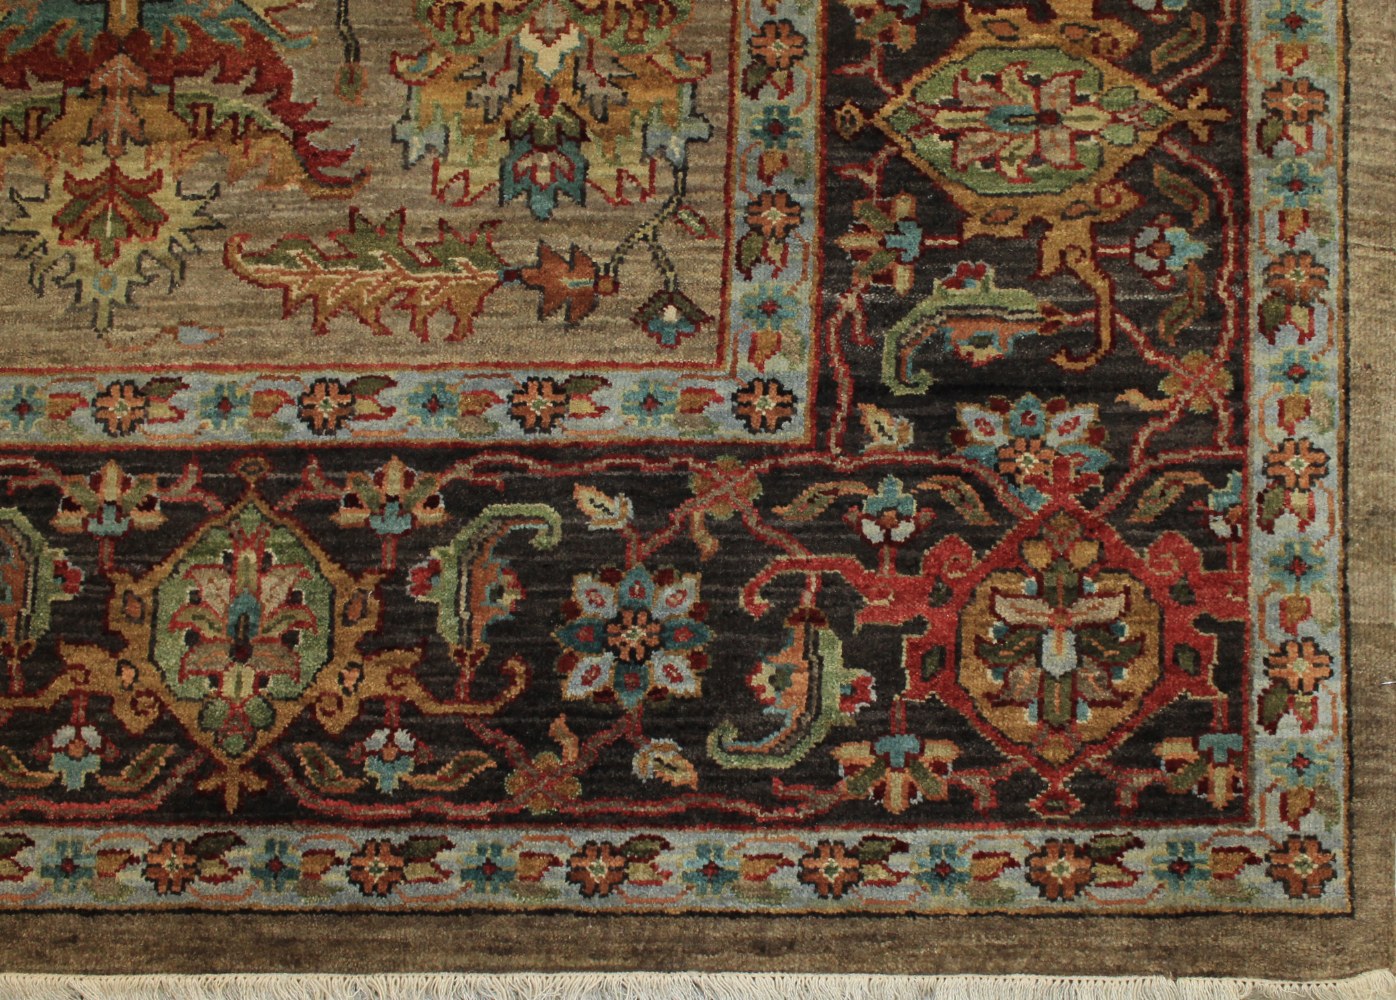 8x10 Antique Revival Hand Knotted Wool Area Rug - MR16650